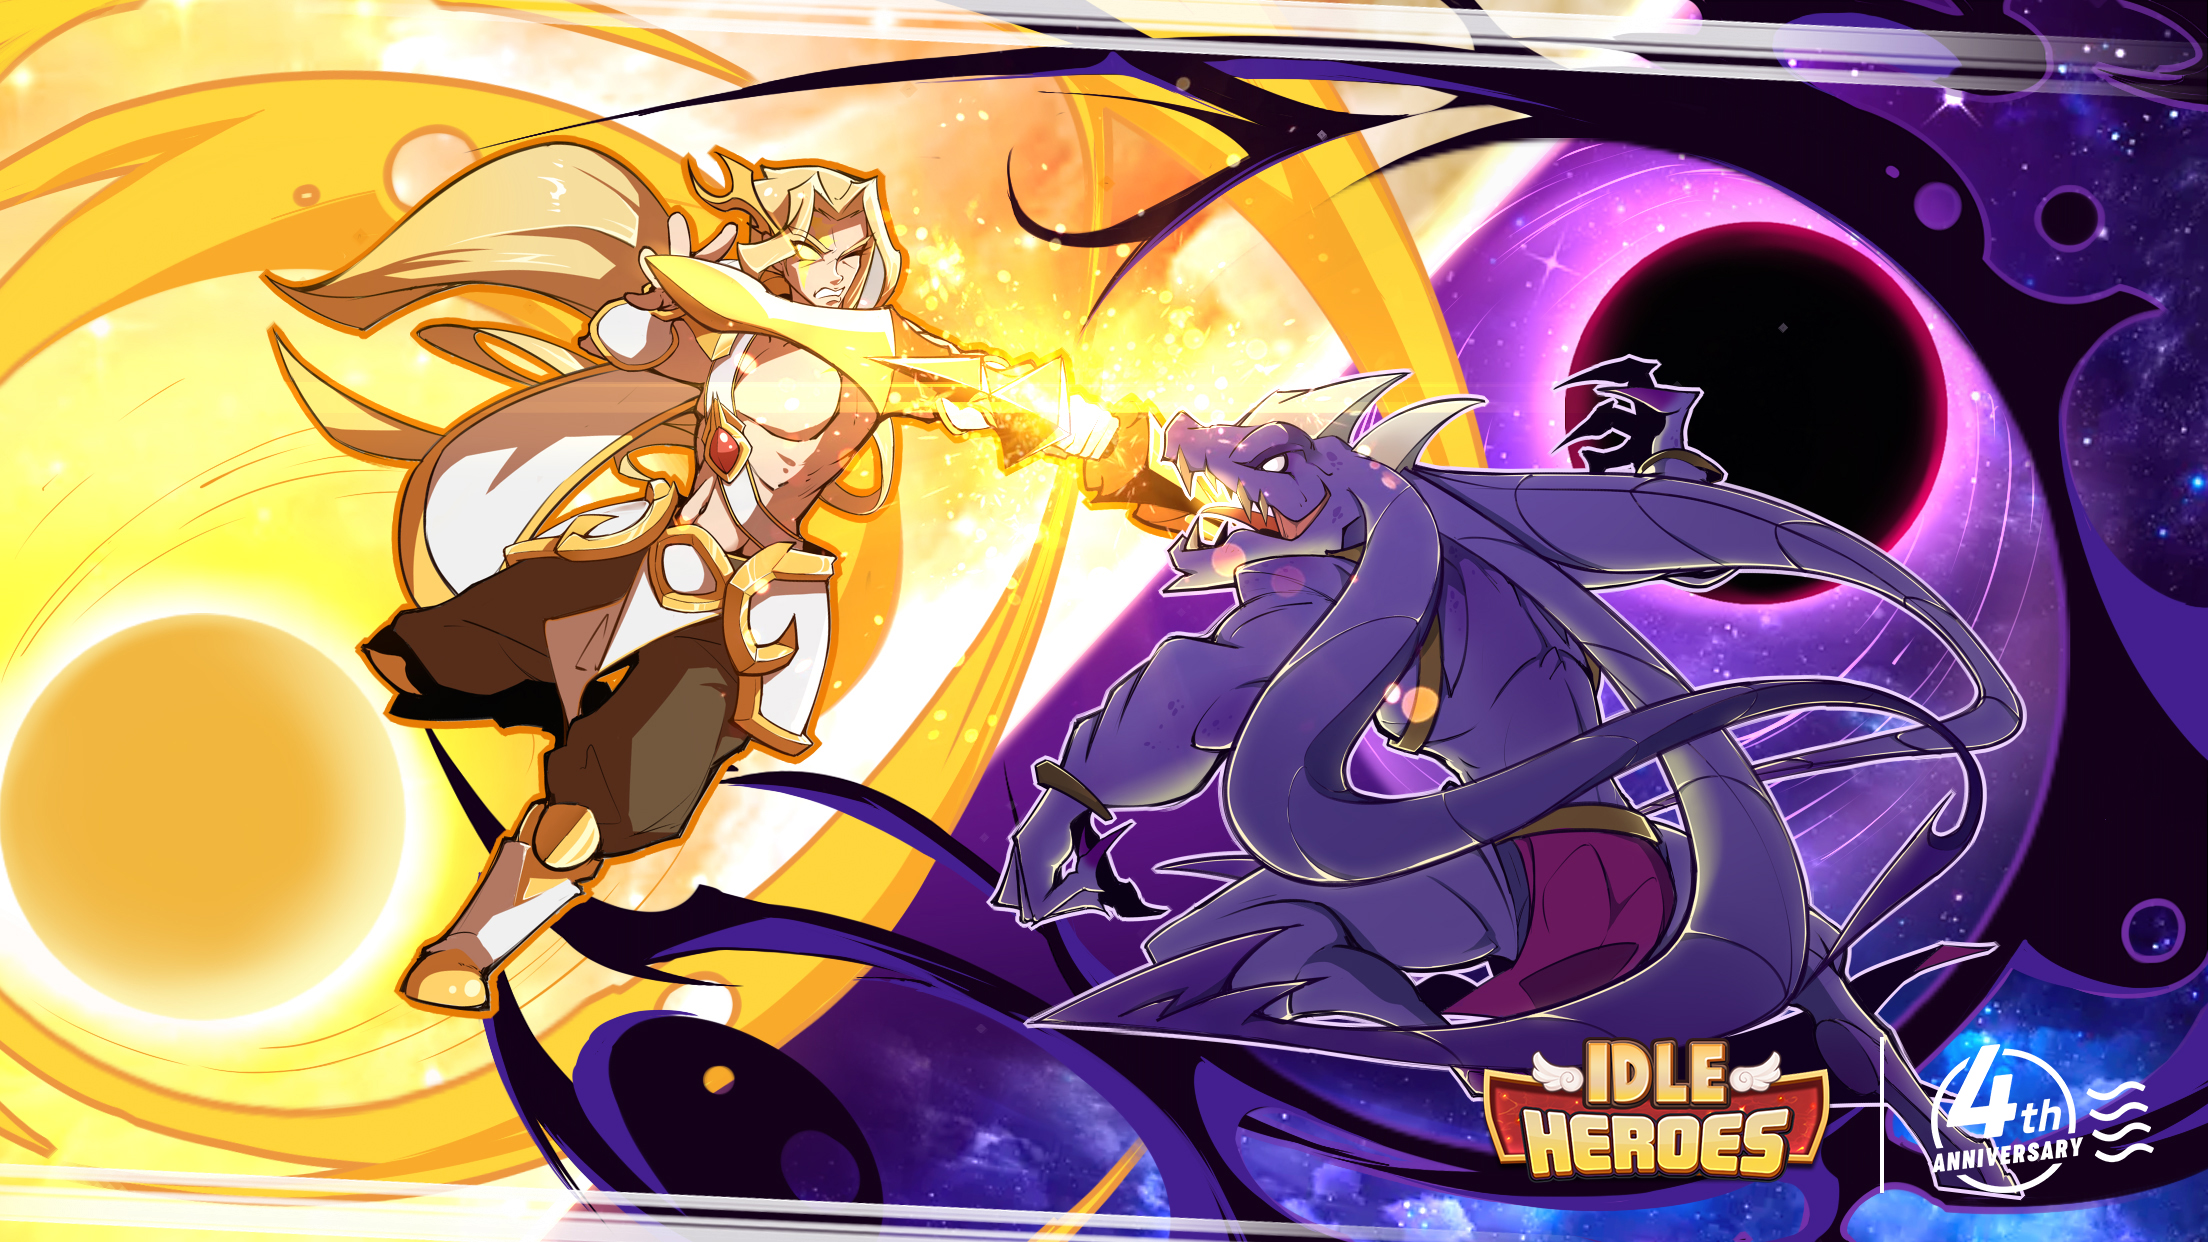 Idle Heroes on Twitter: "🆕Hero Comic Unveil ⚡️ #Idle4thAnniversary #idle4ever / Twitter